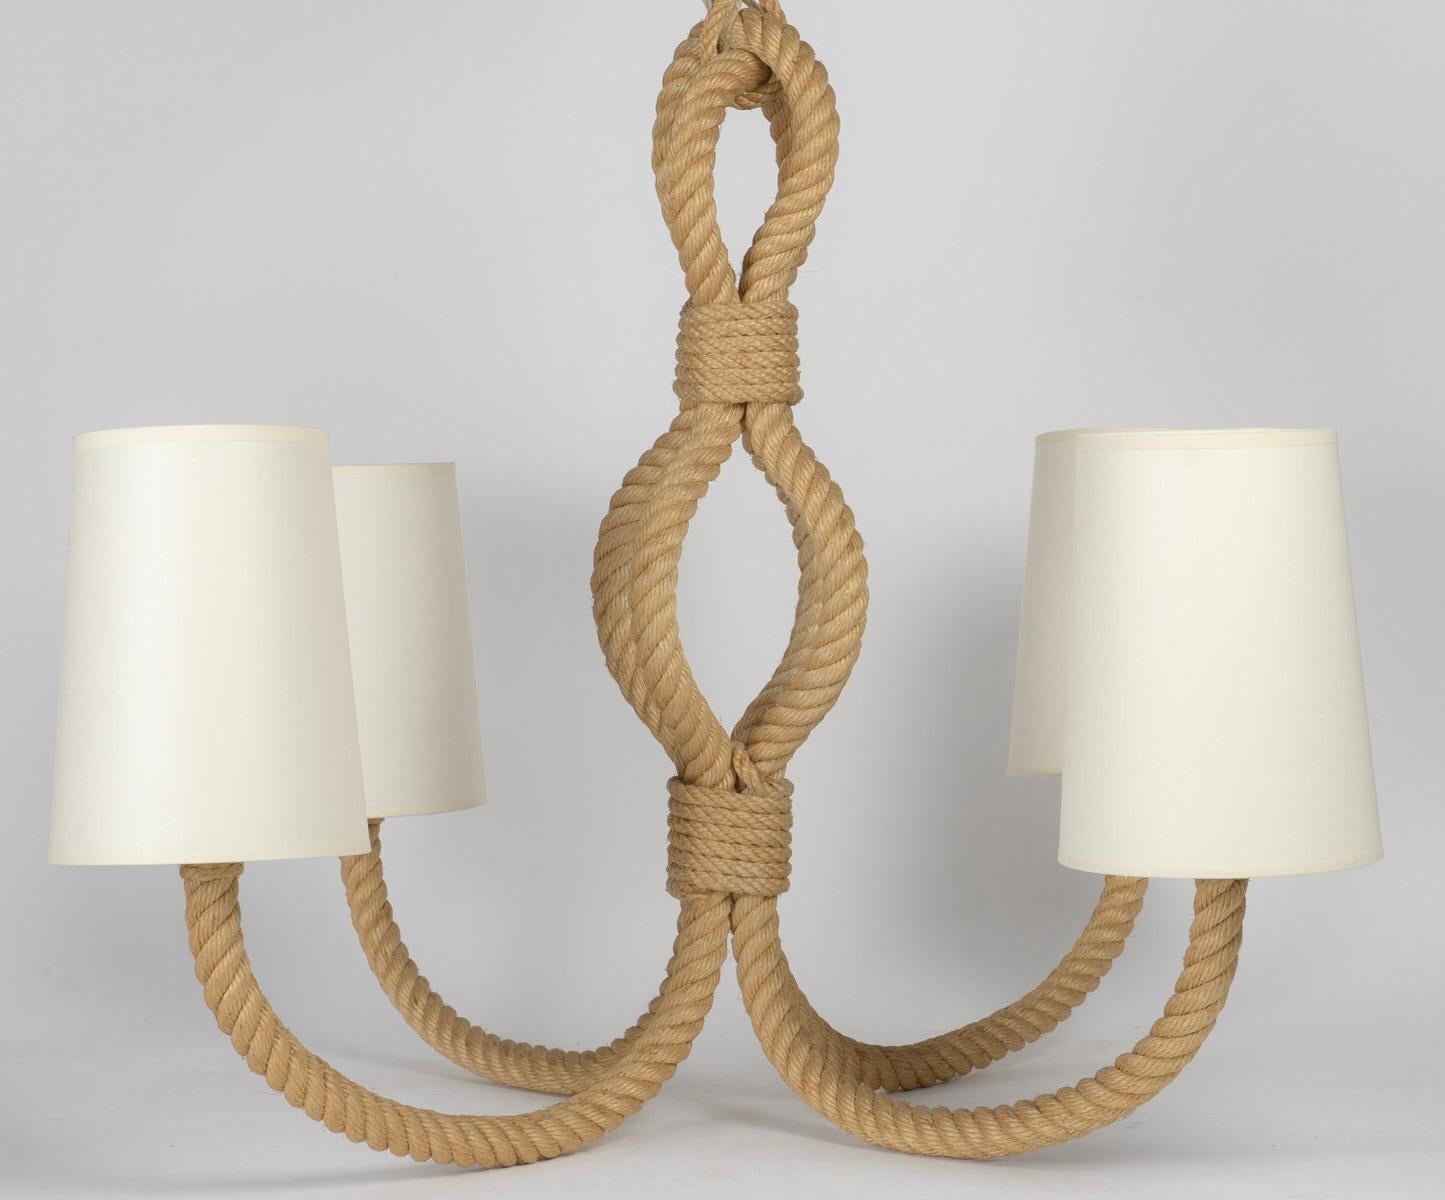  1950 Large Rope Chandelier by Adrien Audoux & Frida Minet In Excellent Condition For Sale In Saint-Ouen, FR